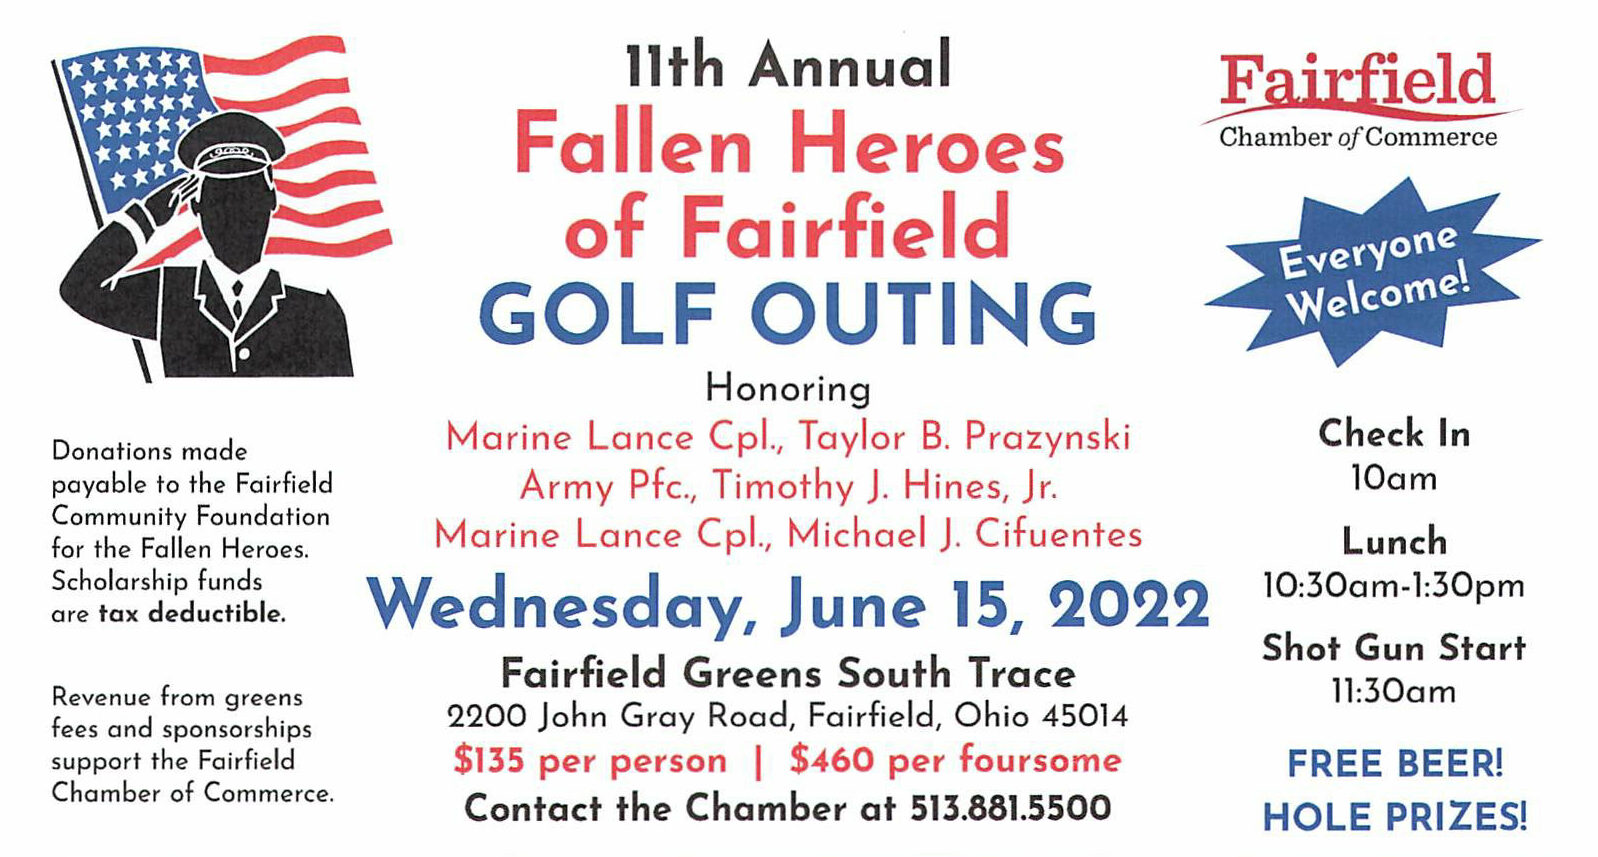 Fairfield-Chamber-Golf-Outing-Details-2022